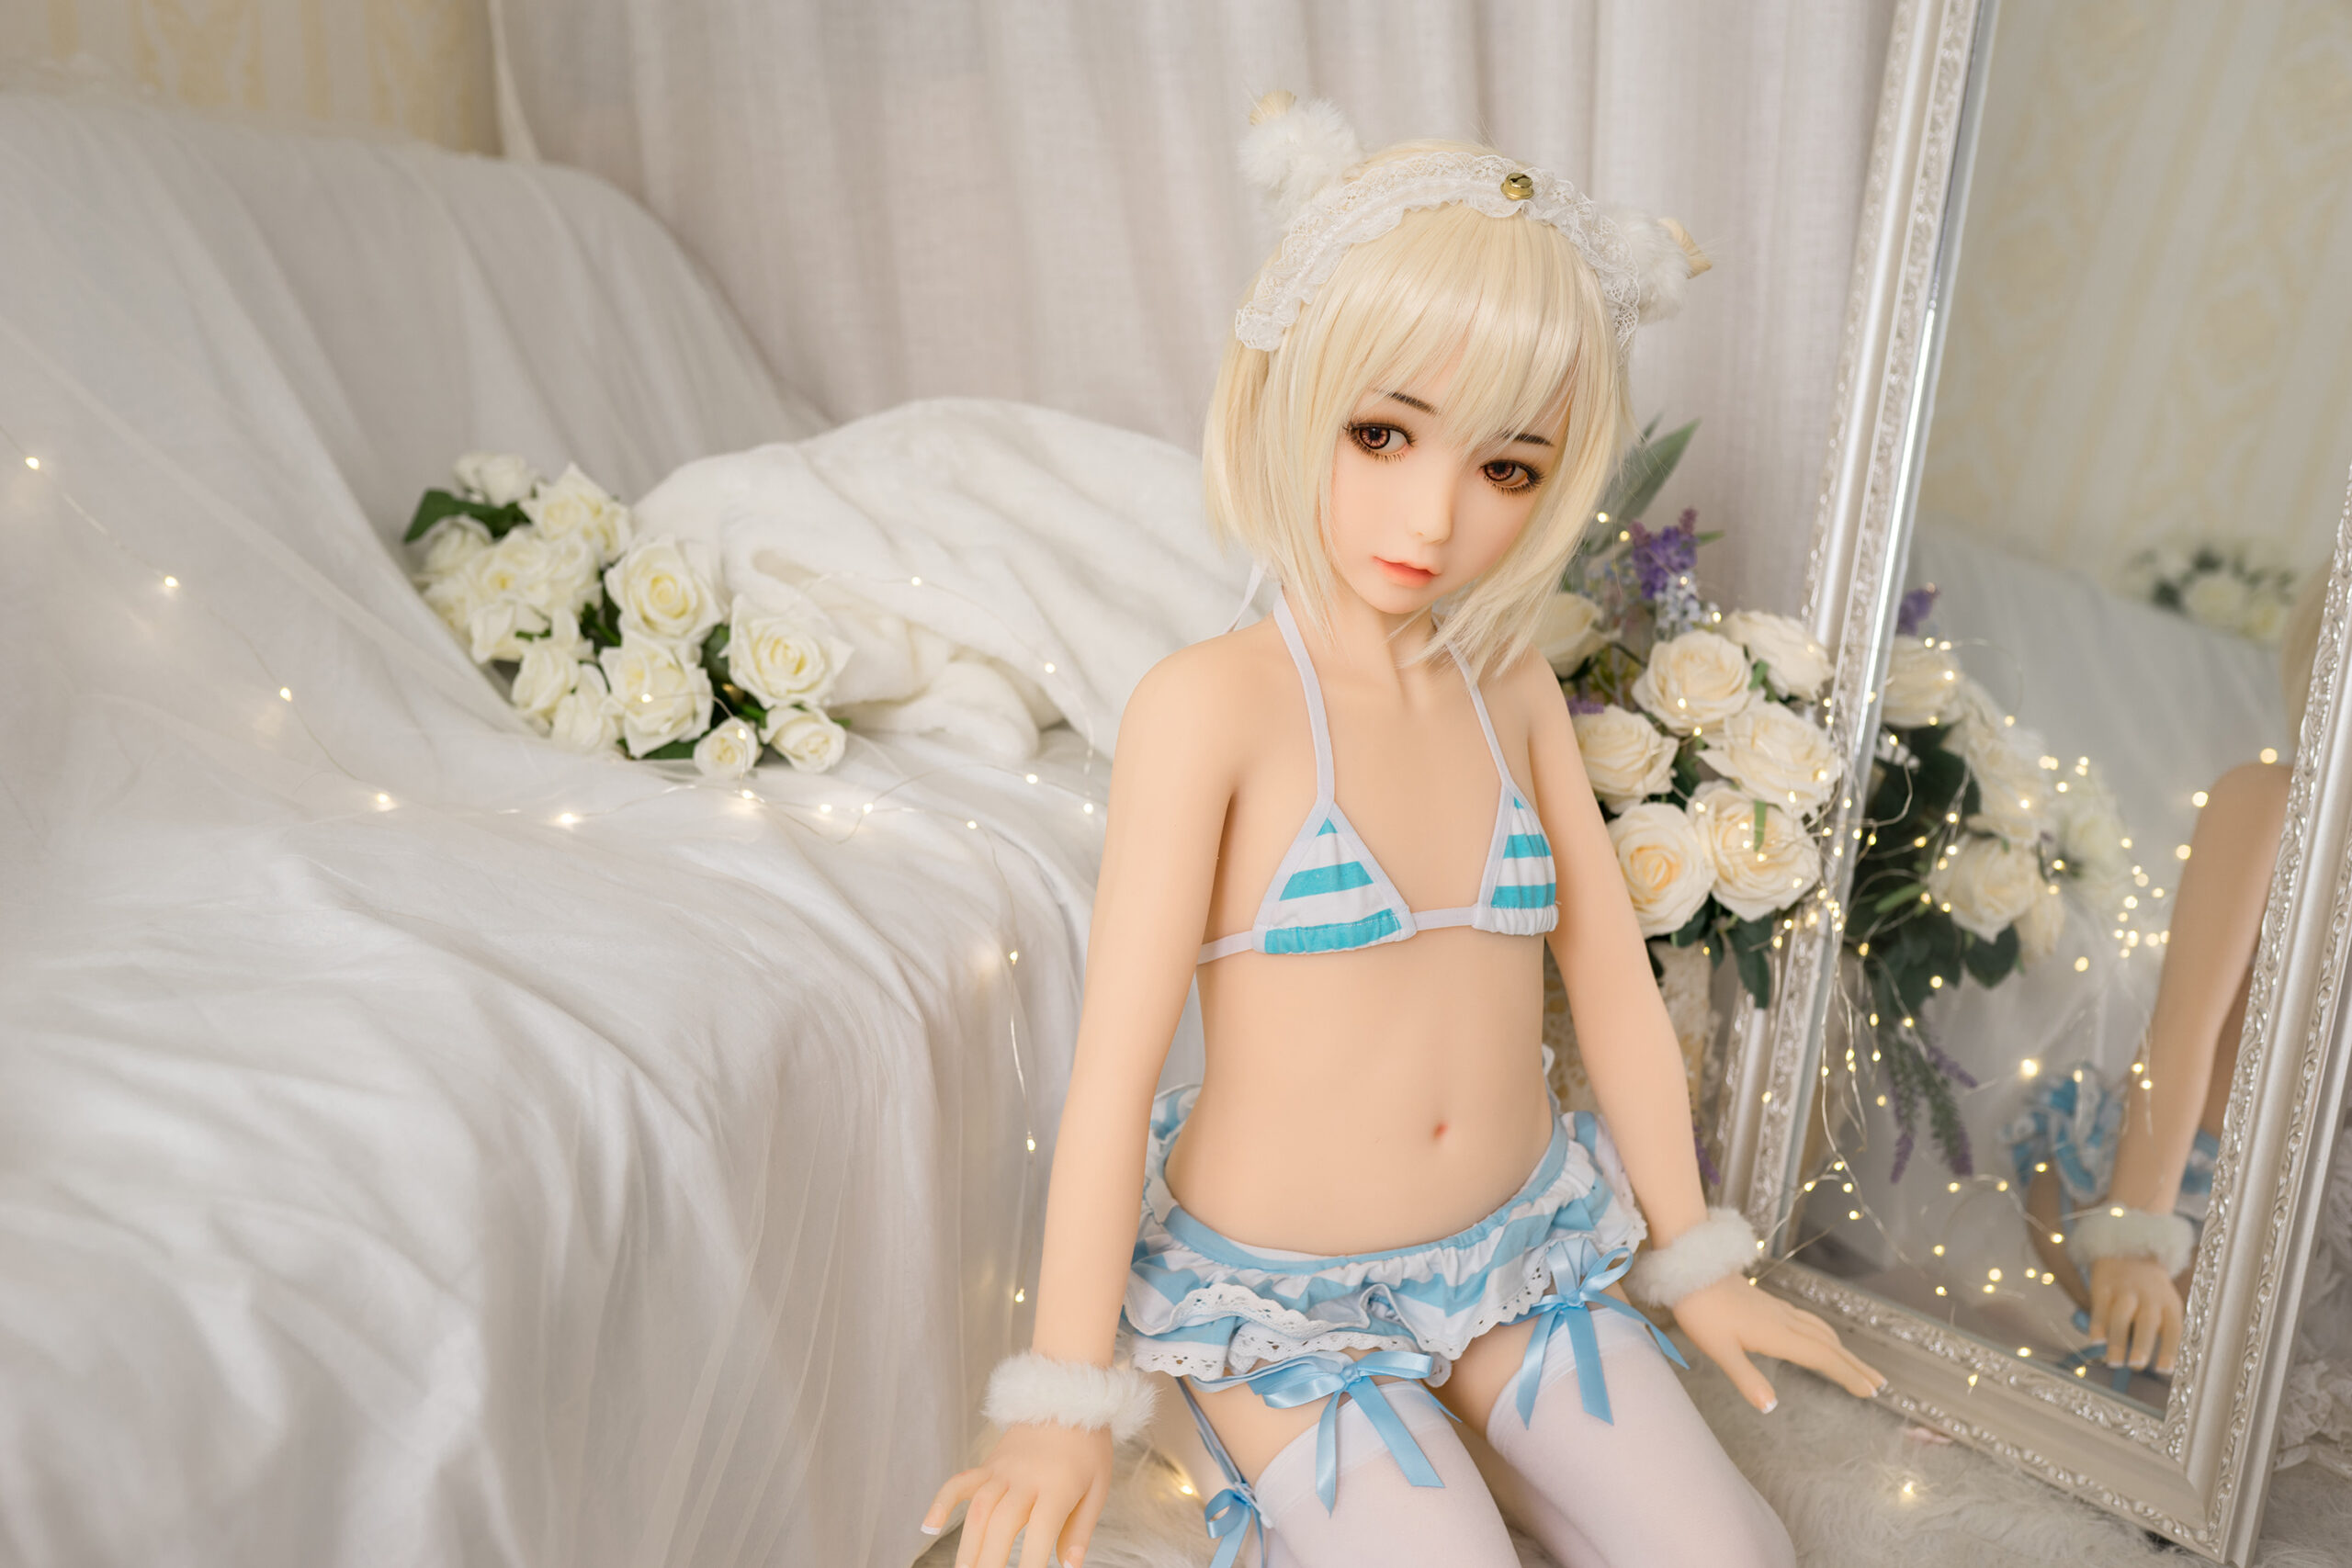 flat chest sex doll with blonde hair